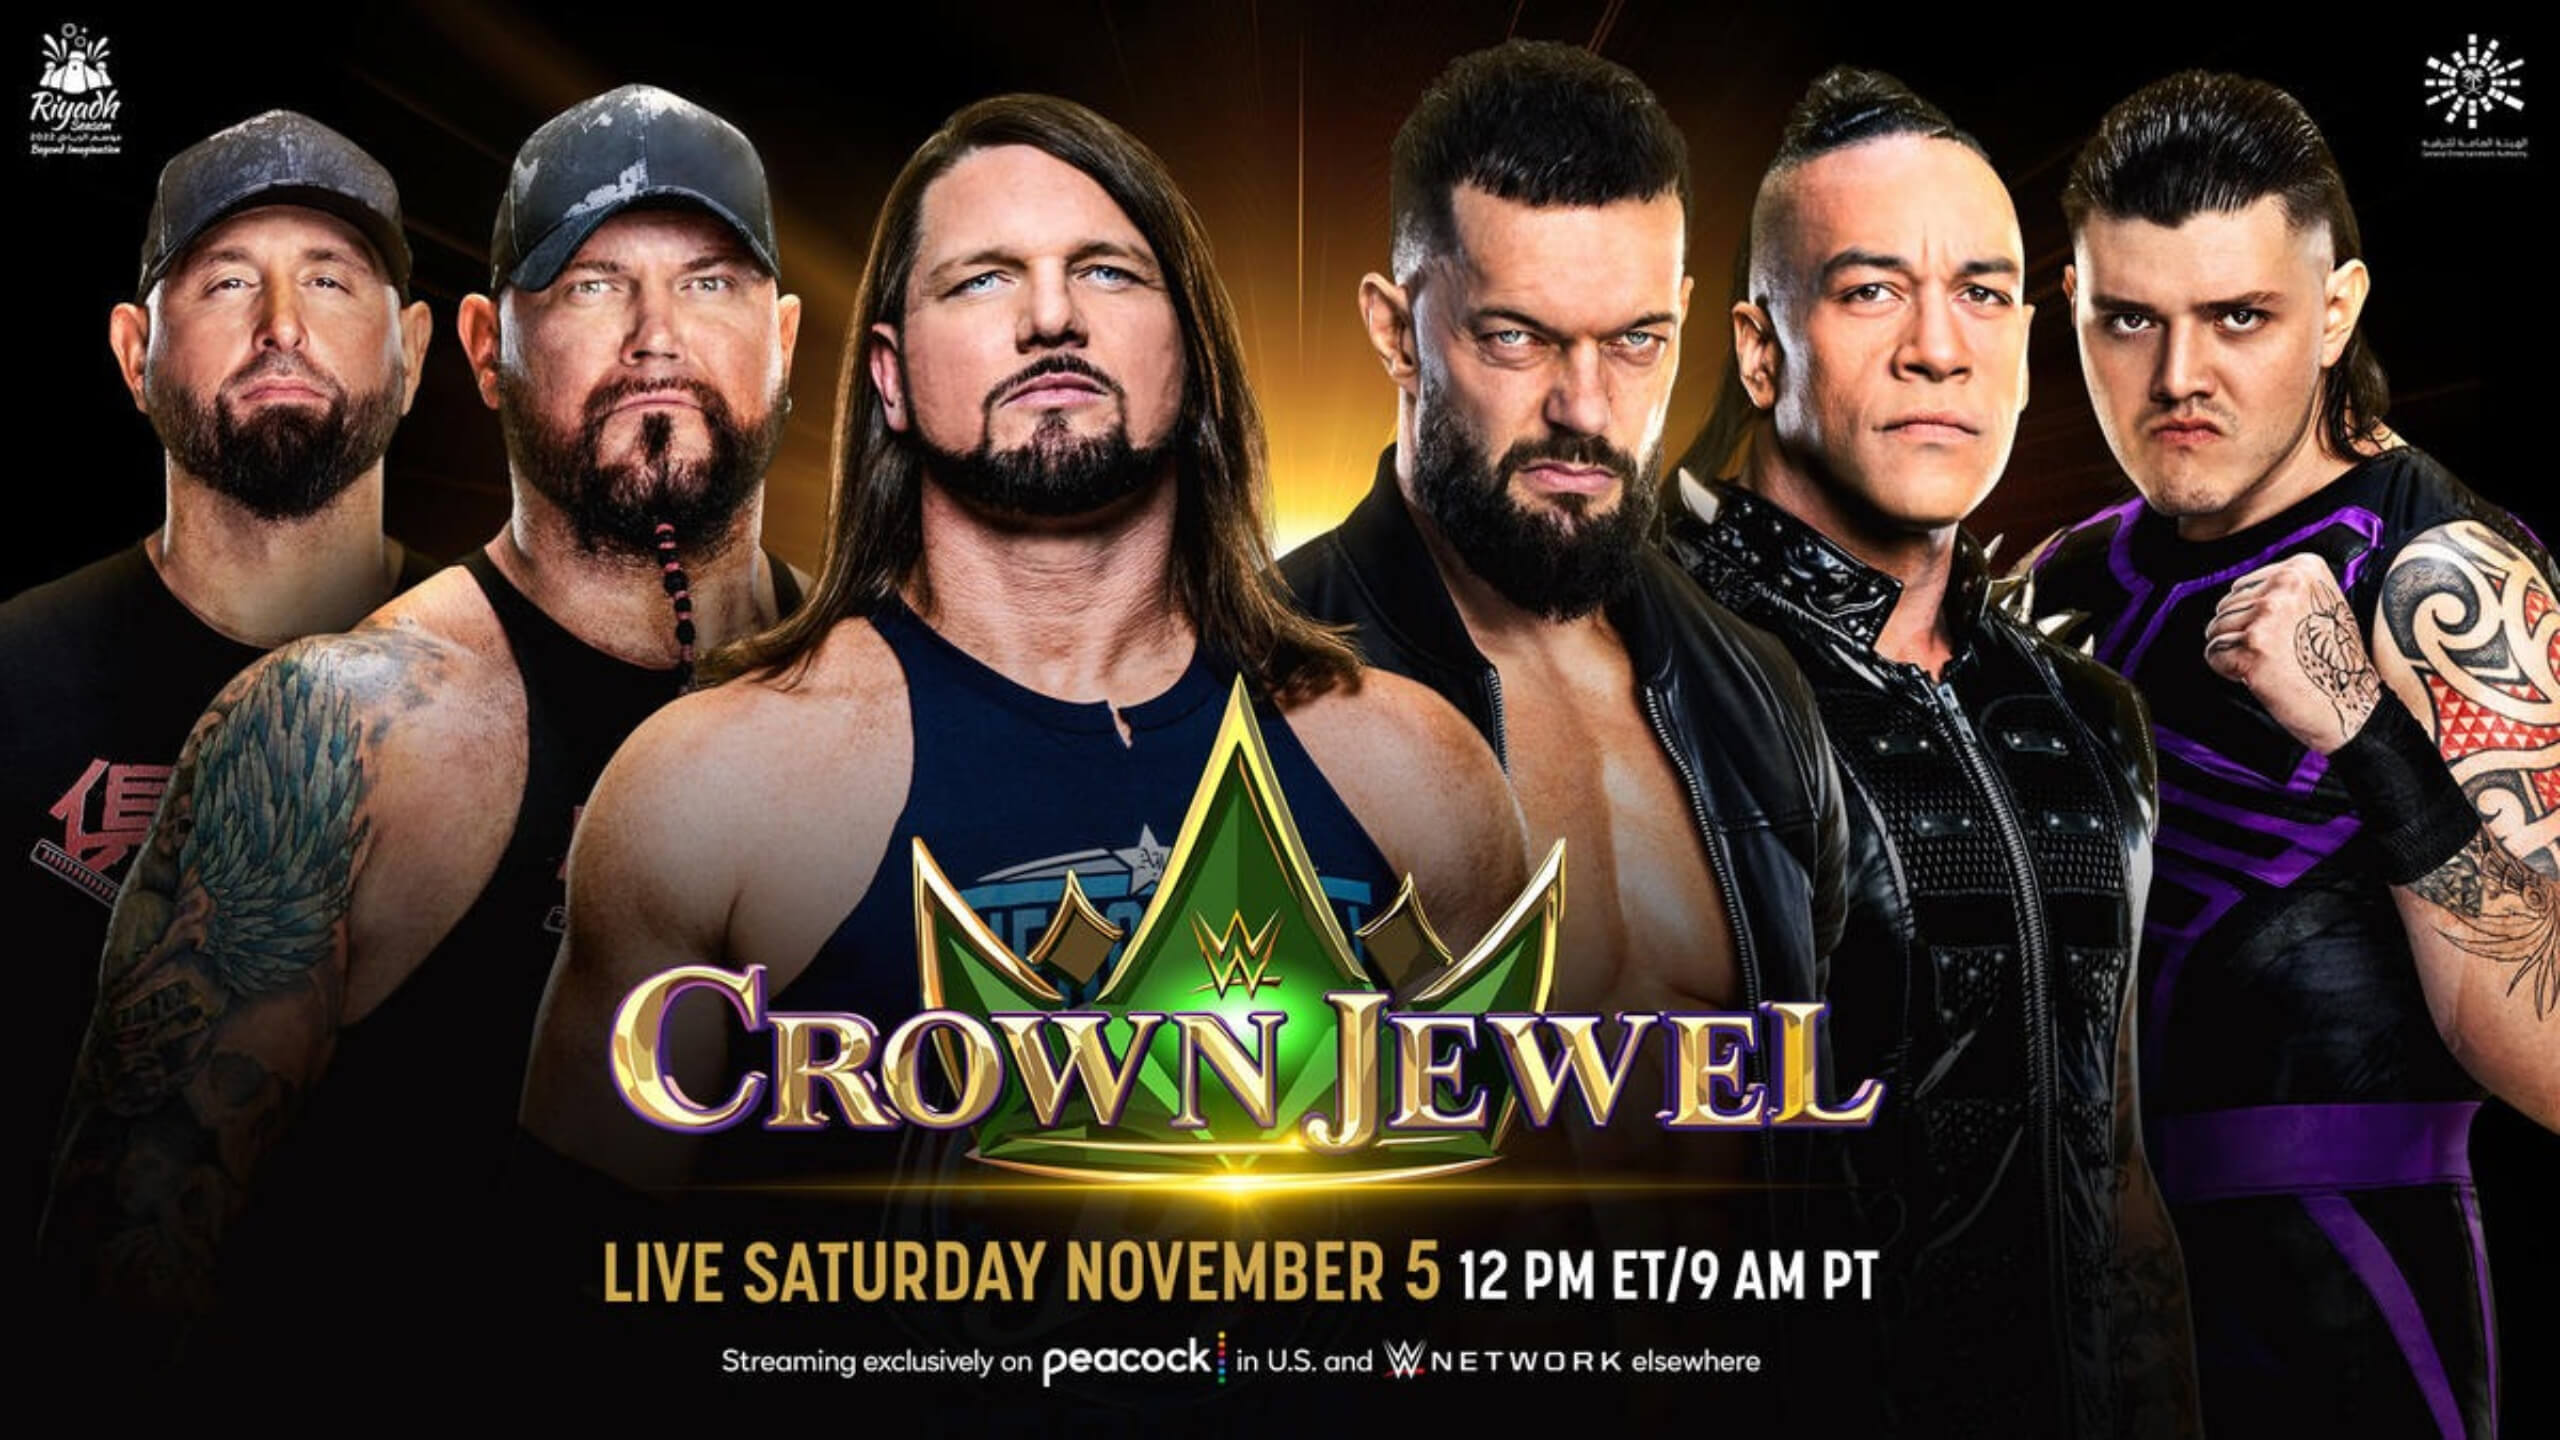 How To Watch WWE Crown Jewel Live in 2022